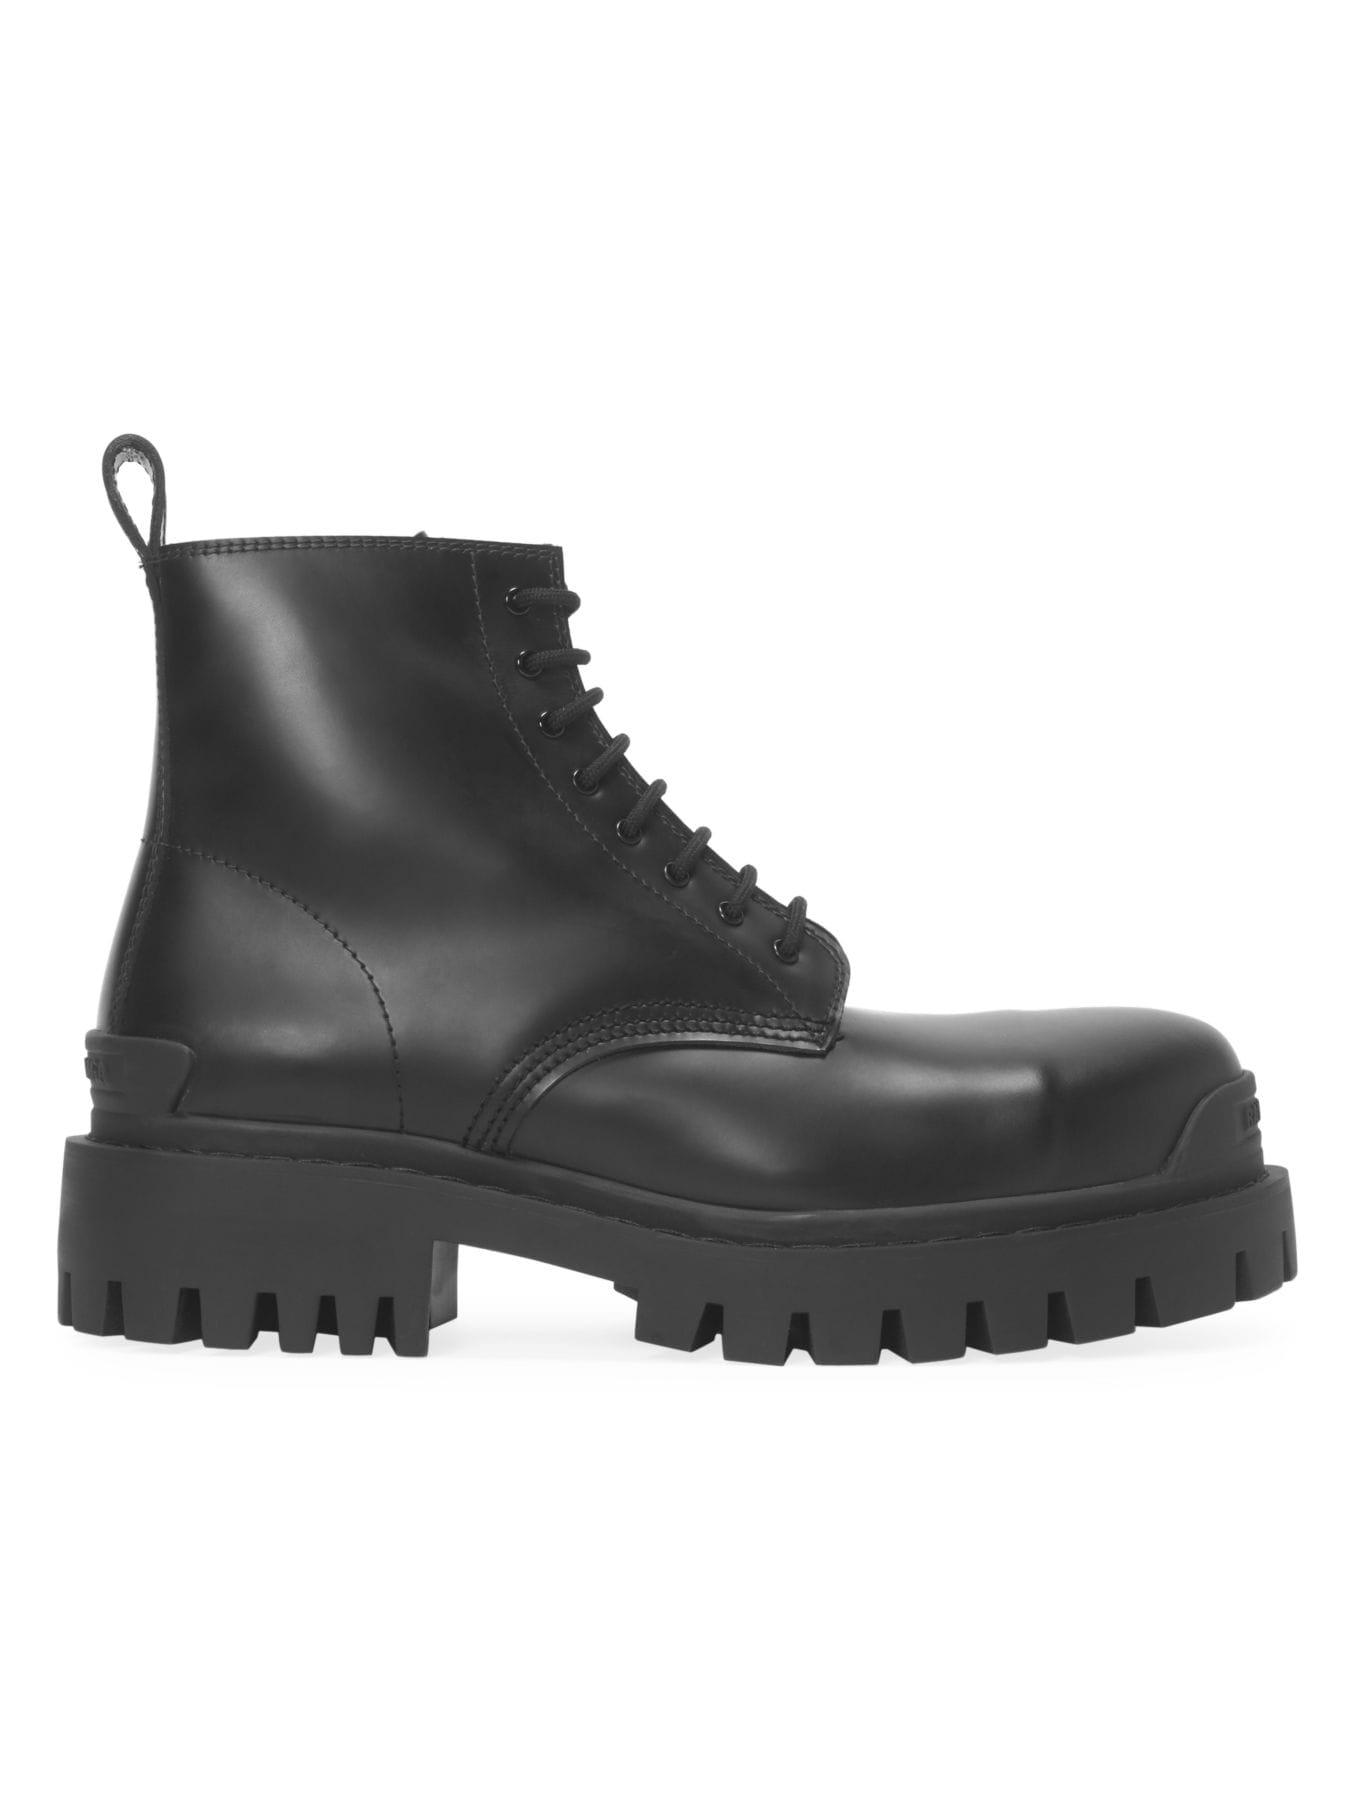 Balenciaga Strike Leather Combat Boots in Black for Men - Lyst